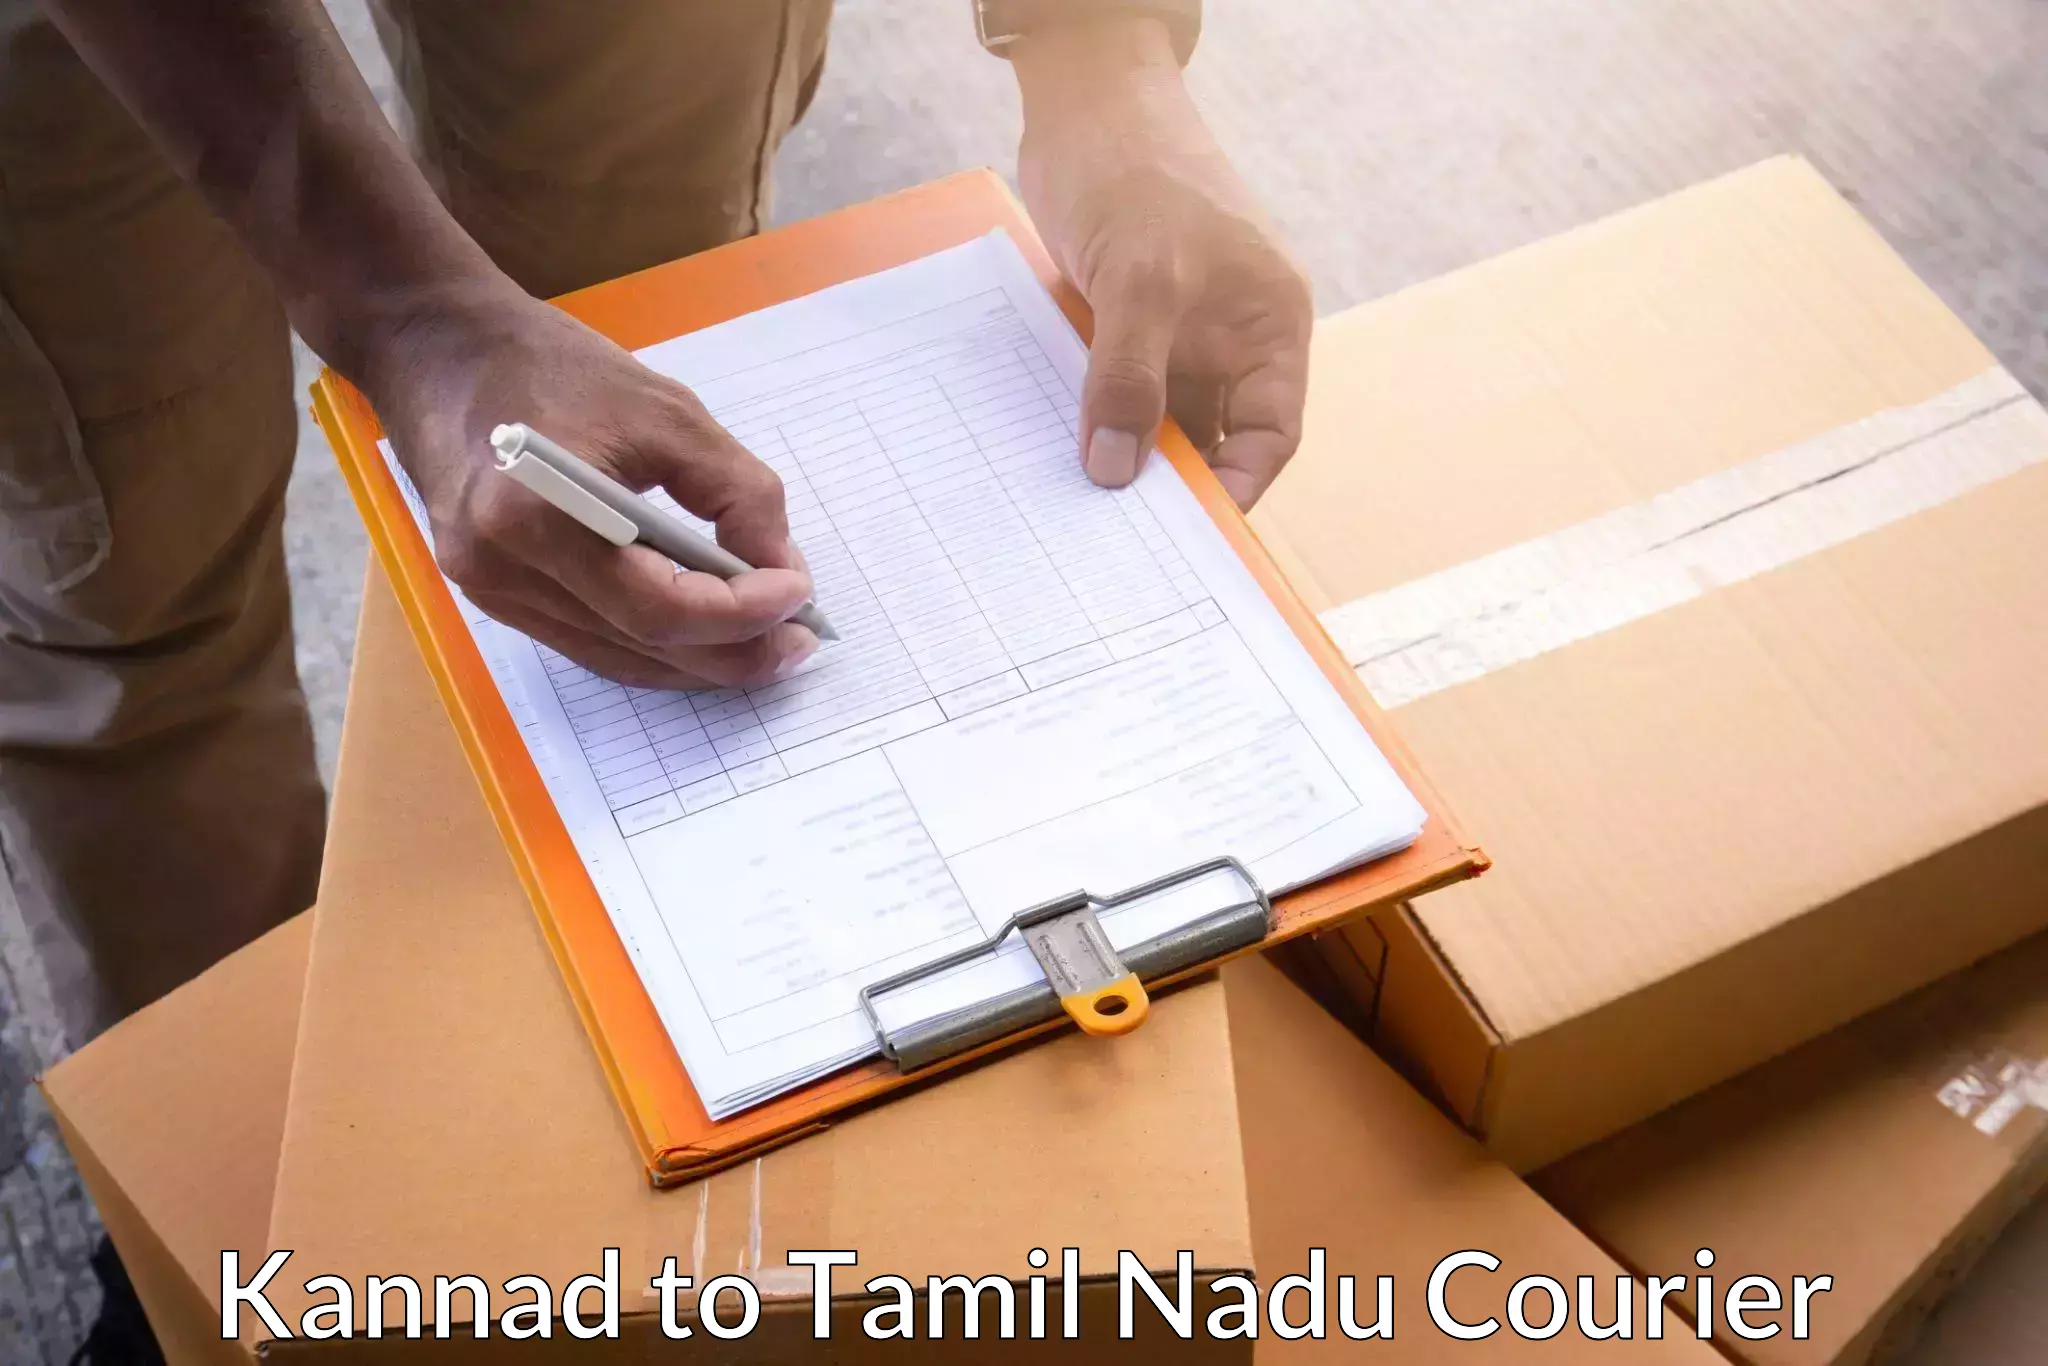 Courier service booking Kannad to SRM Institute of Science and Technology Chennai